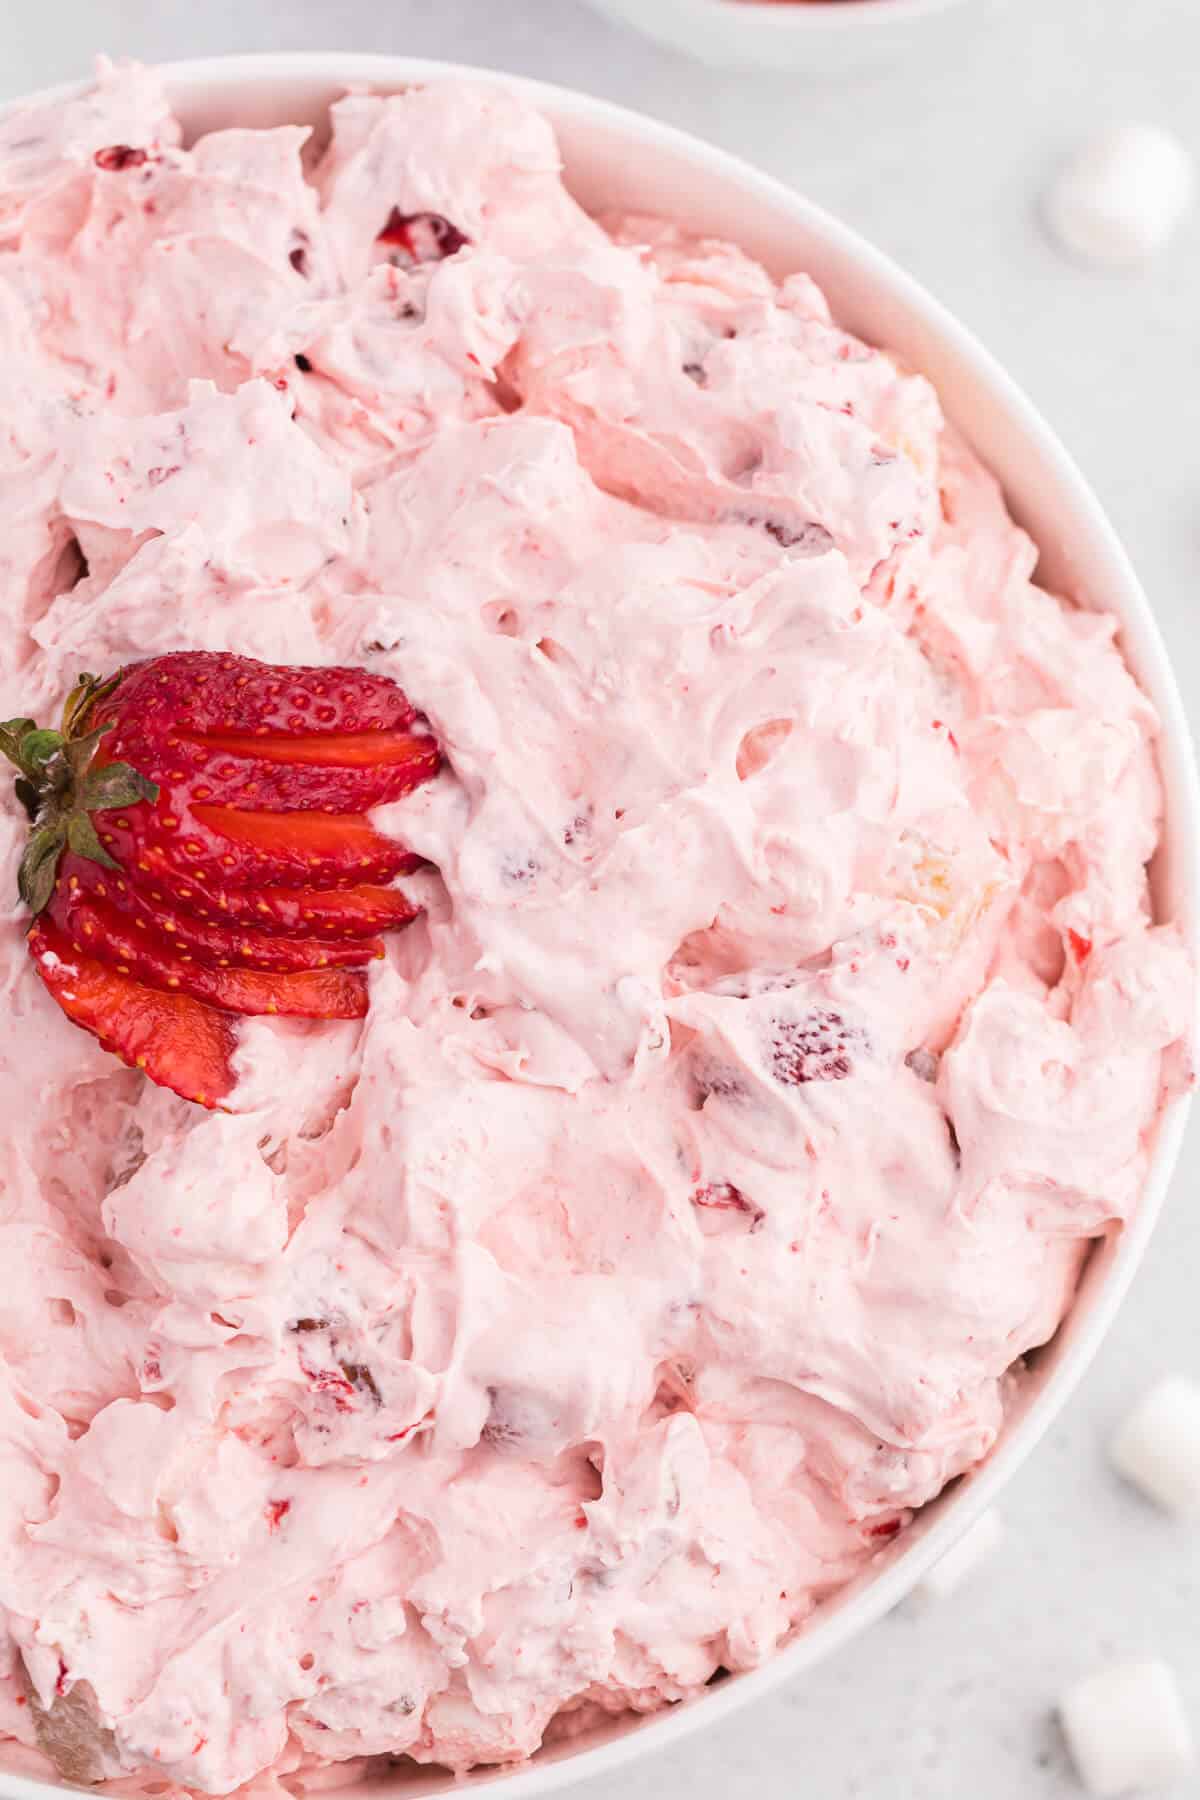 Strawberry fluff salad in a white bowl.